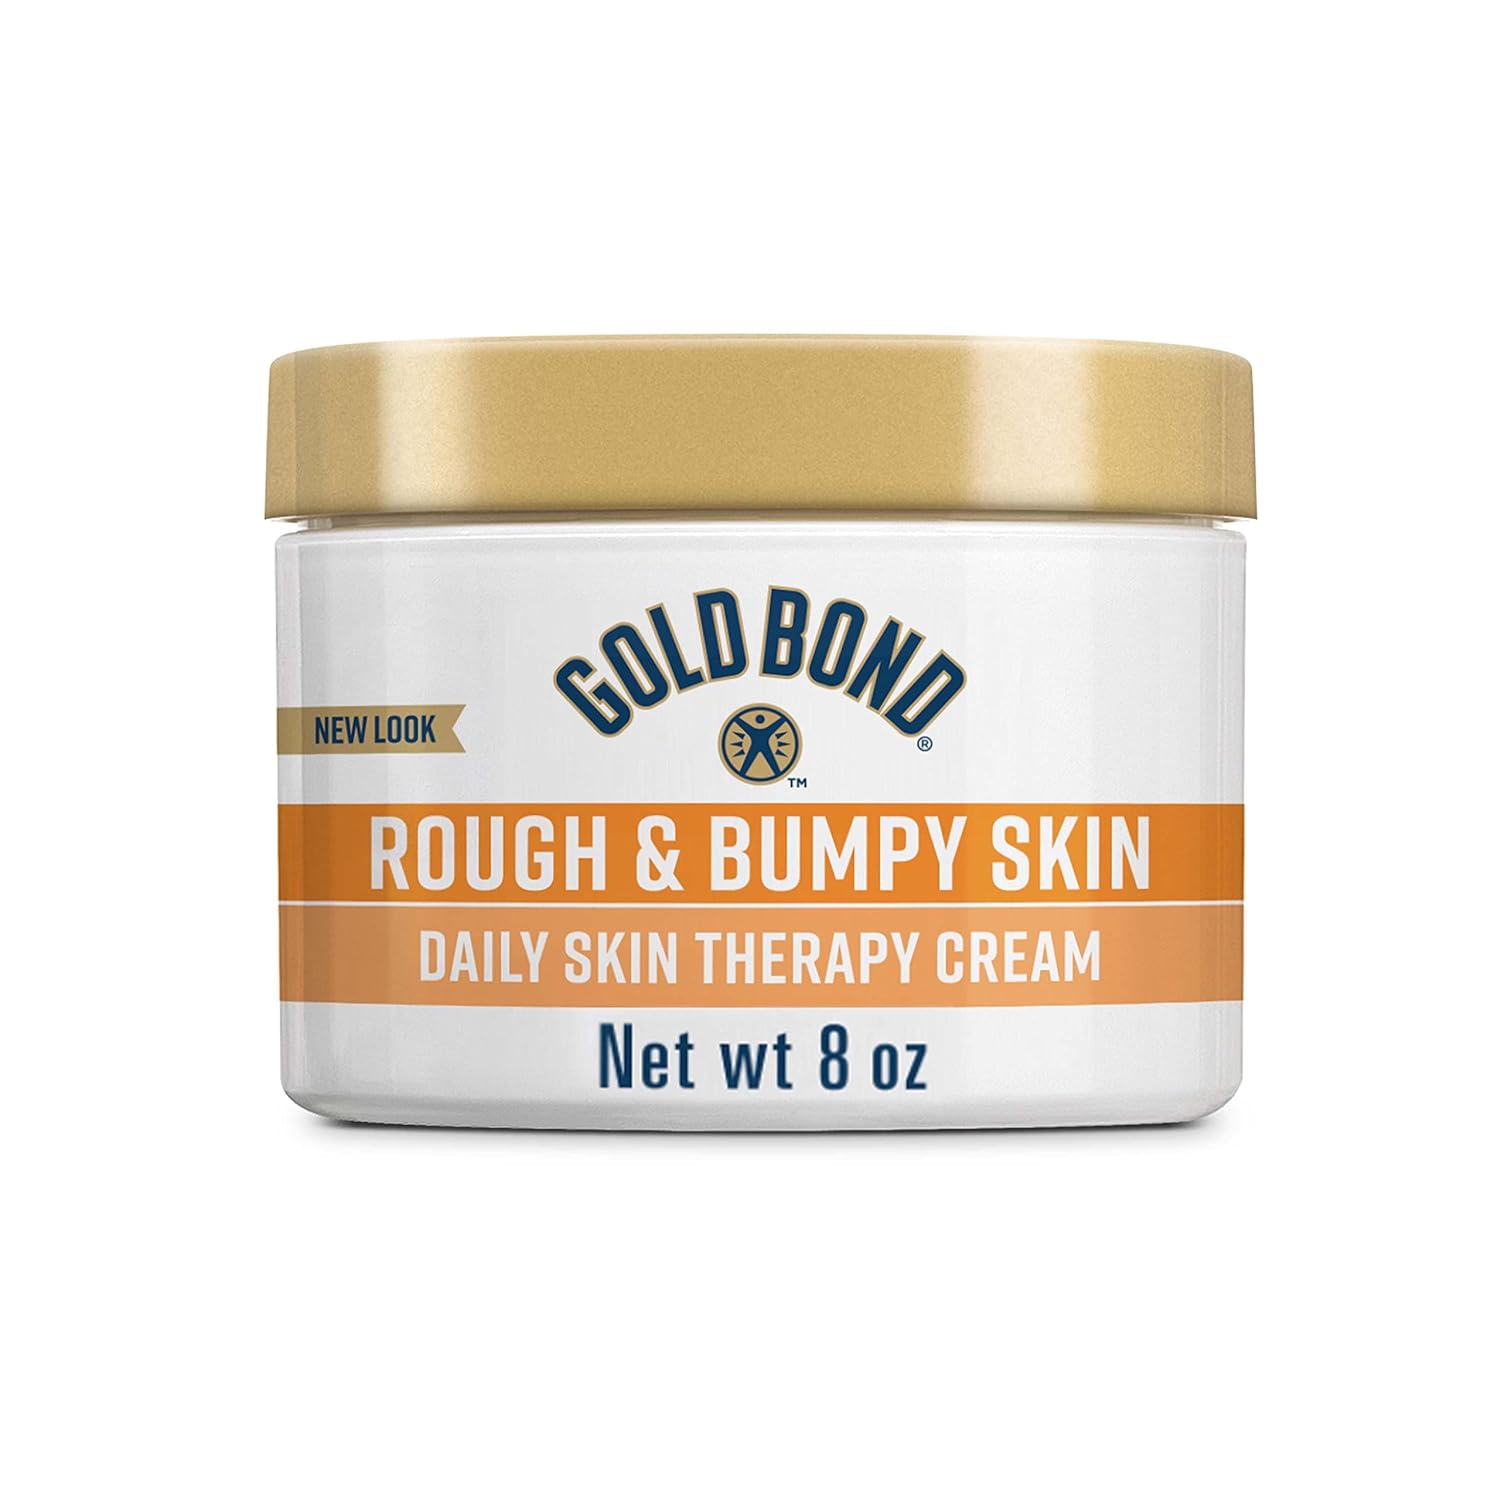 Gold Bond Rough & Bumpy Daily Skin Therapy Cream, 8 oz., With 7 Moisturizers & 3 Vitamins